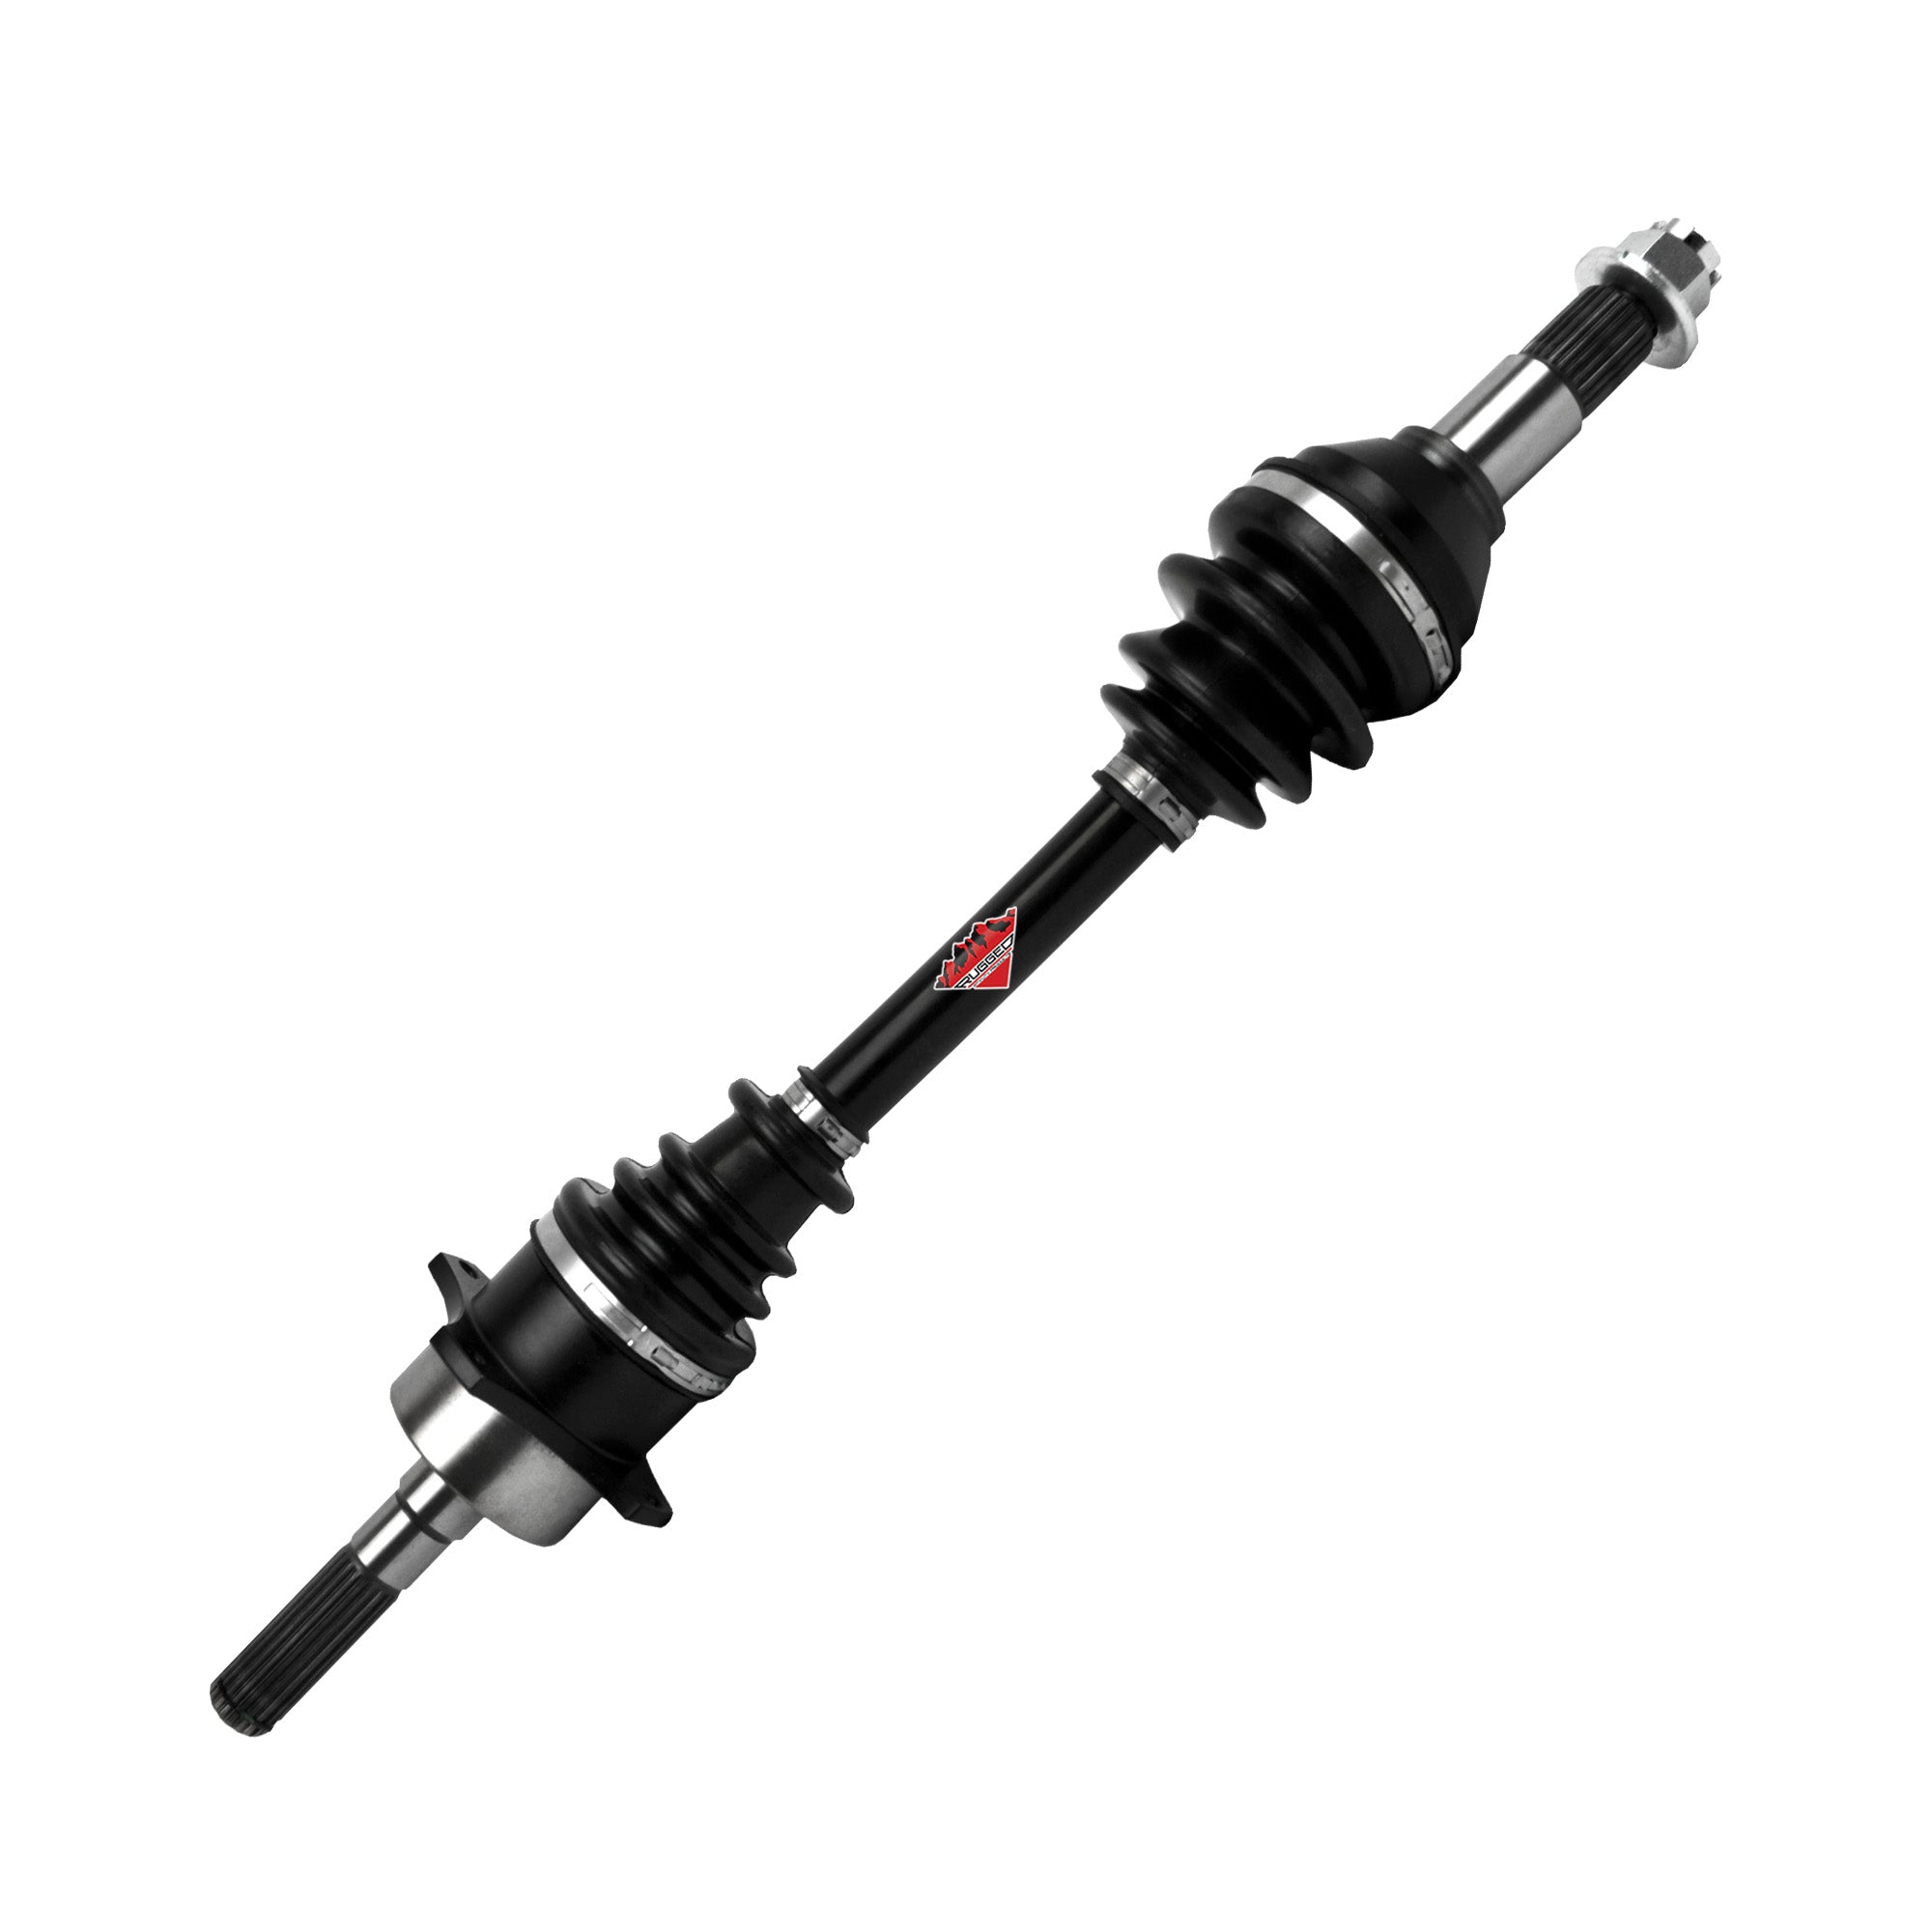 Performance Axle for Can Am Renegade 500 